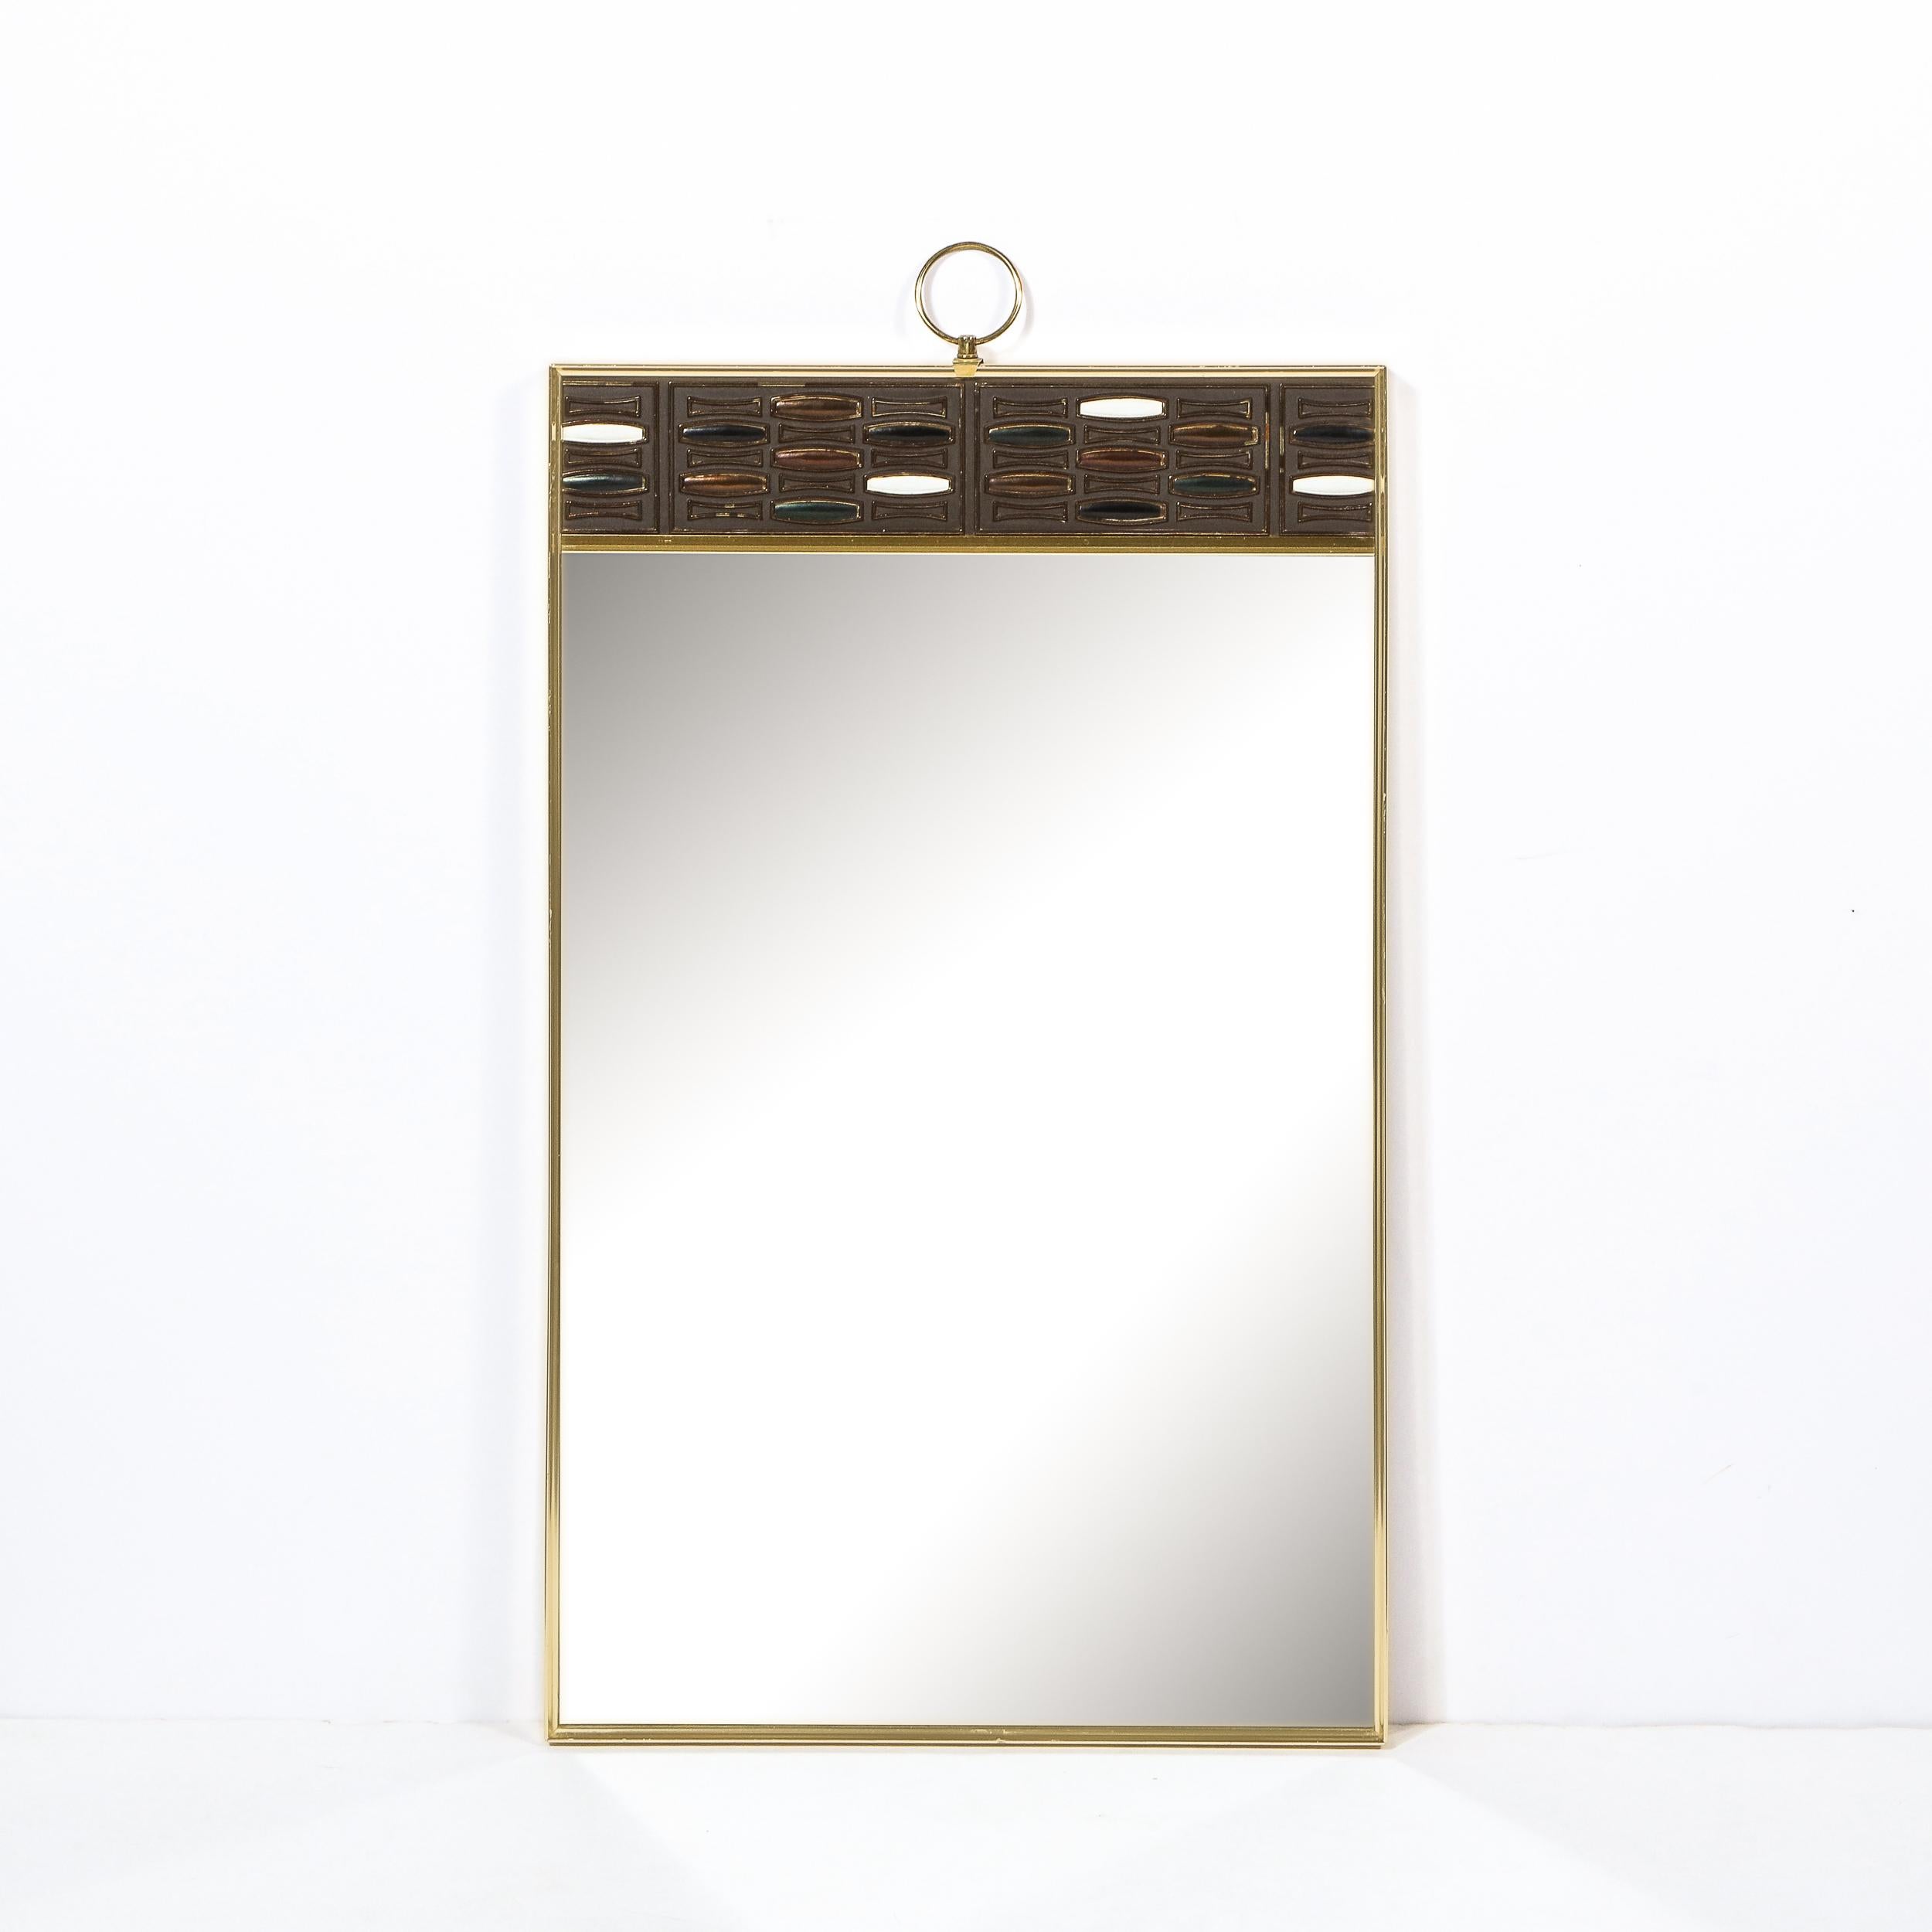 This stunning Mid-Century Modern brass wall mirror was realized in the United States, circa 1960. The mirror offers a rectangular body in lustrous brass with a band of abstract detailing at the top offering stylized ovoid forms in hues of white and